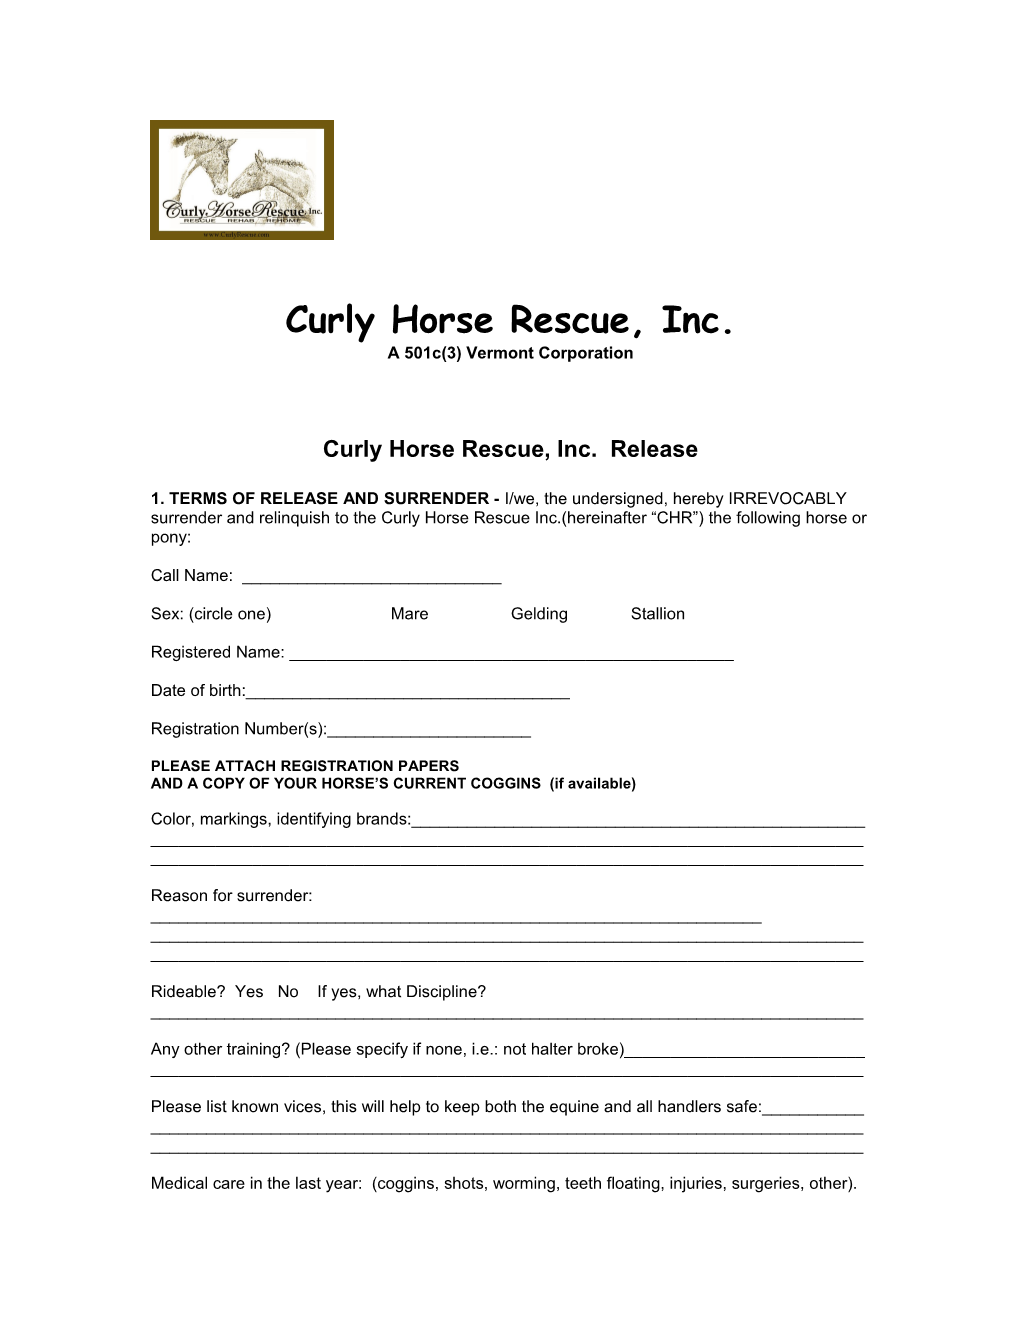 Curly Horse Rescue, Inc